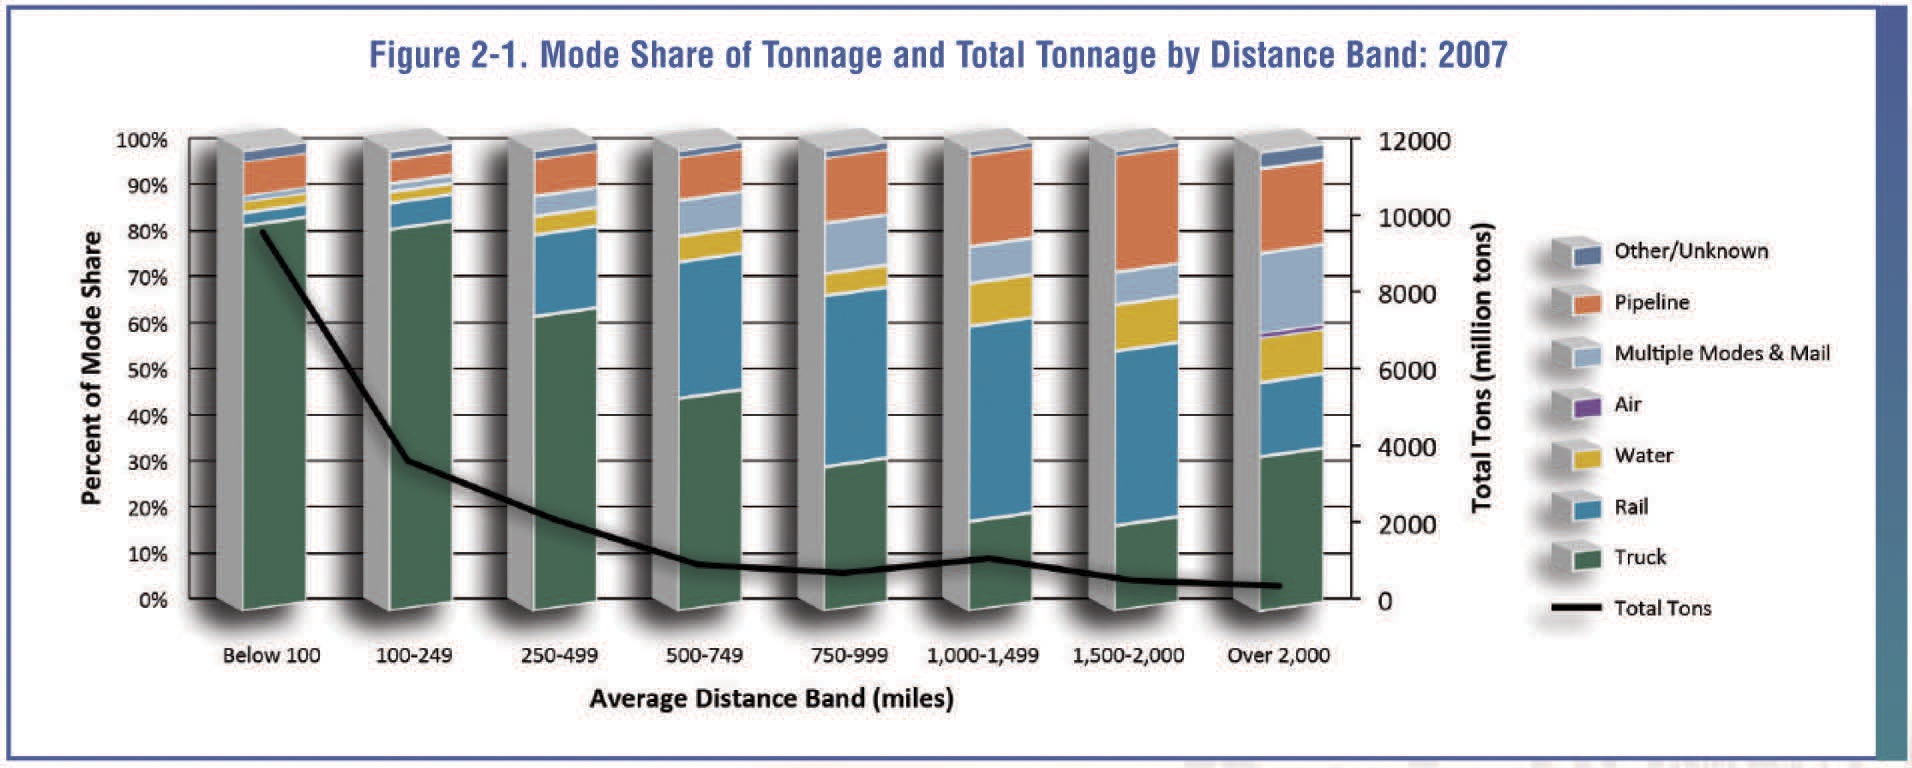 Figure 2-1. Bar graph showing the mode share of tonnage by distance band for 2007.